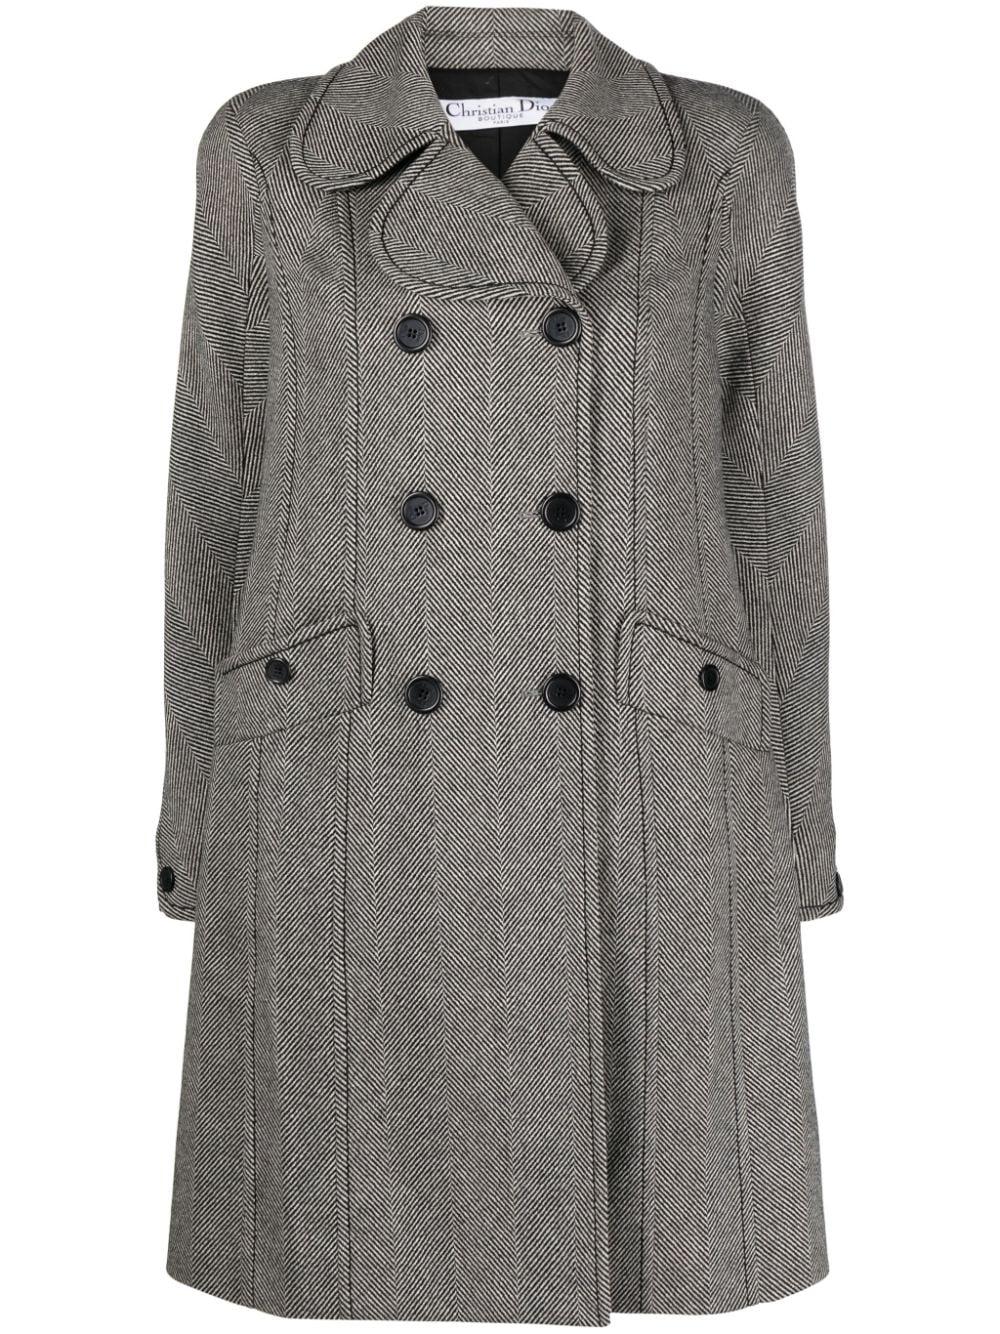 Christian Dior Double-Breasted Coat For Sale 2